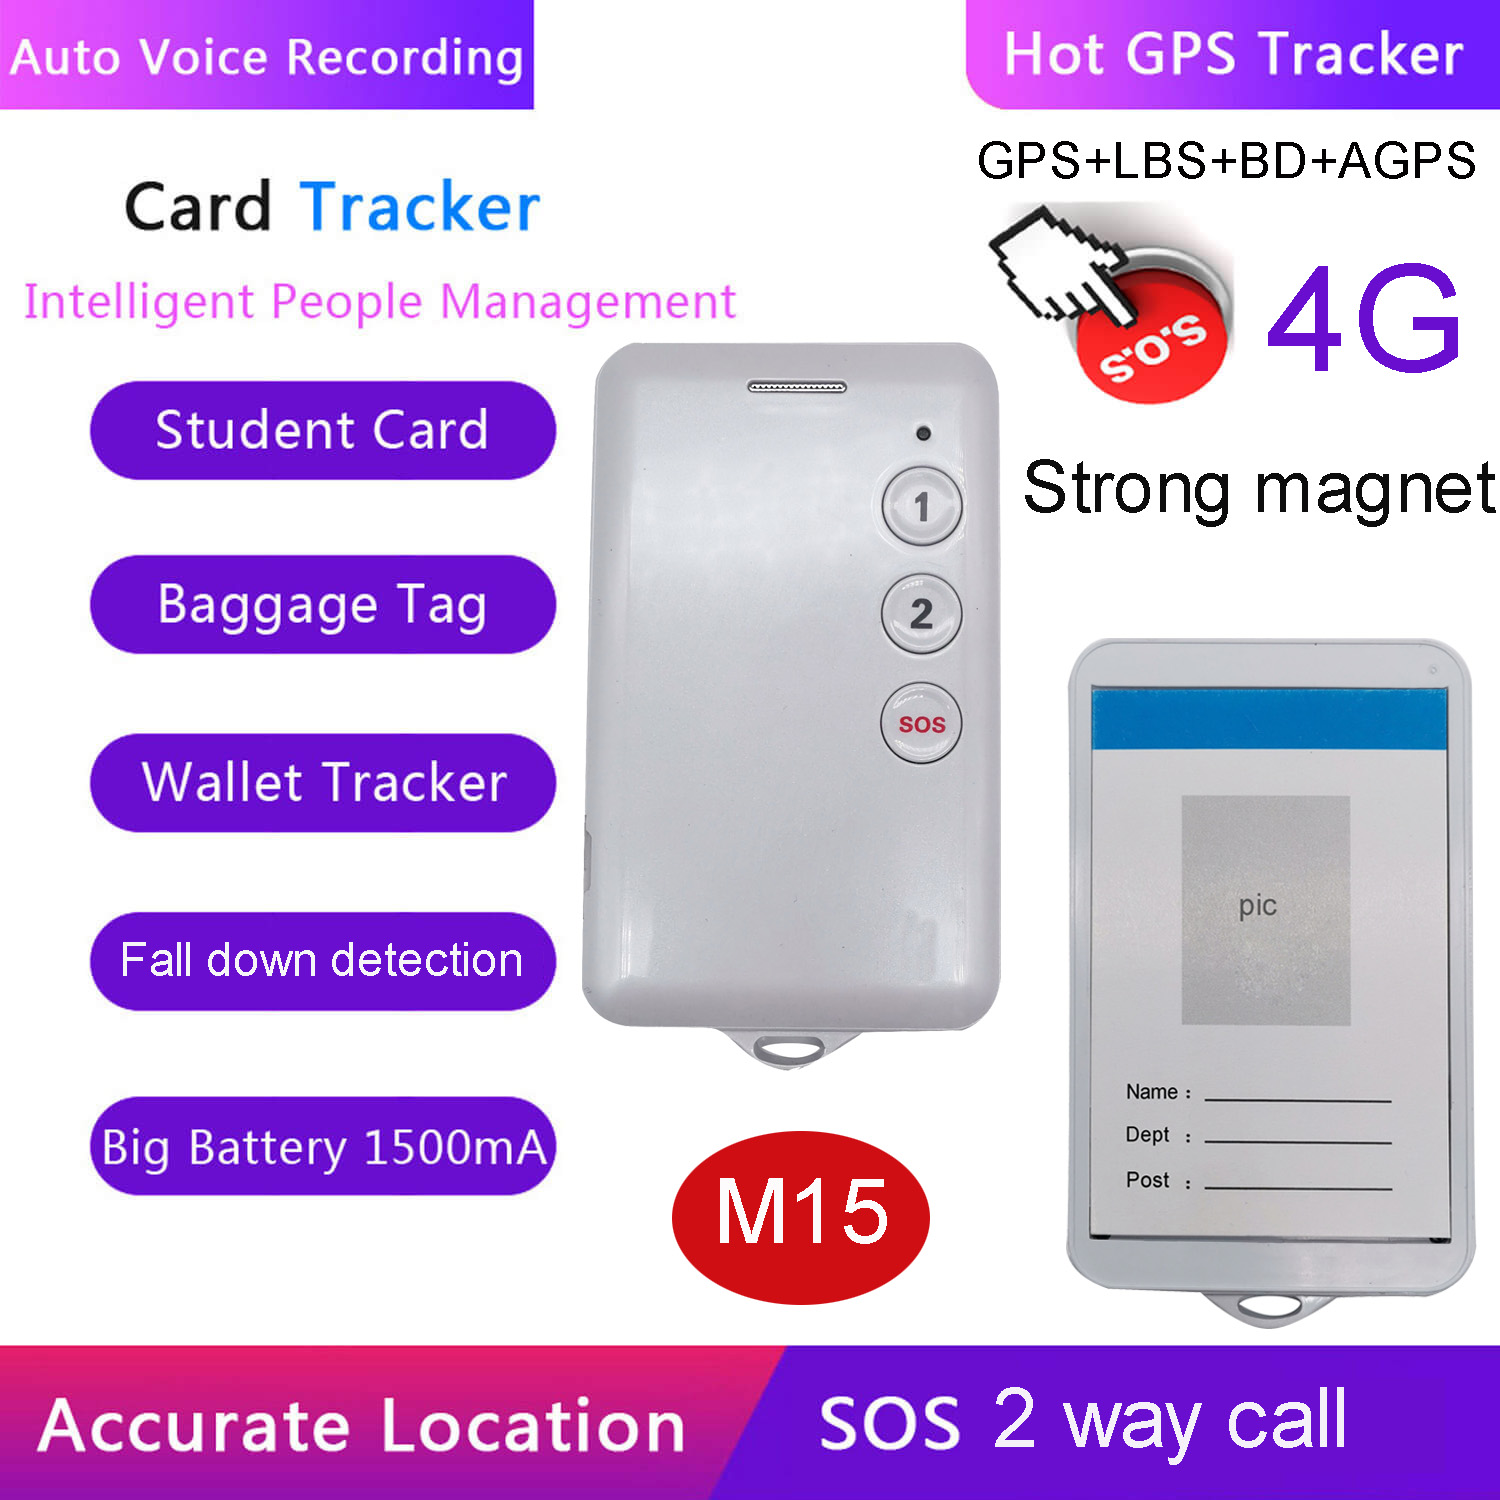 4G New 1500mAh GPS Tracker ID Card Car Tracking Device with Overspeed Alarm Alerts M15